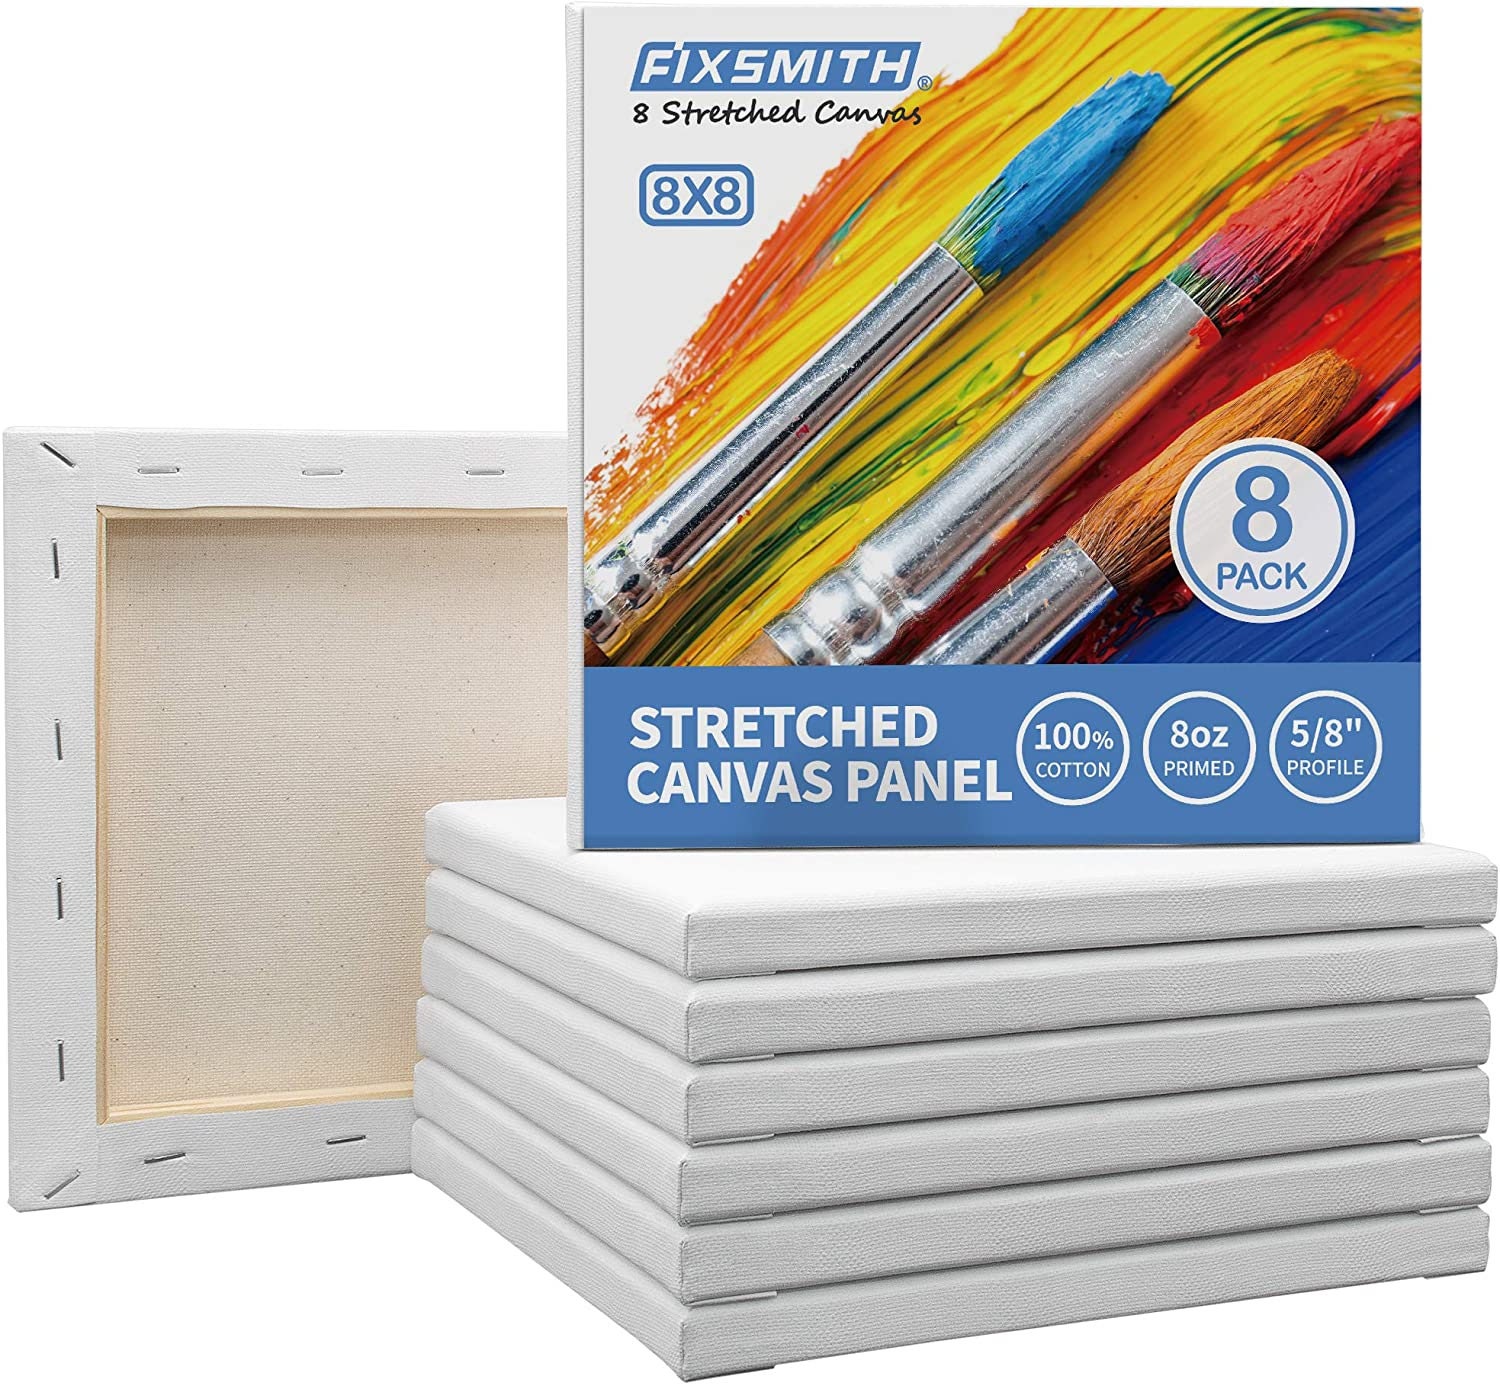 FIXSMITH Stretched White Blank Canvas 8 Pack, Primed,100% Cotton,5/8 Inch  Profile Value Pack for Acrylics, Oils & Others 